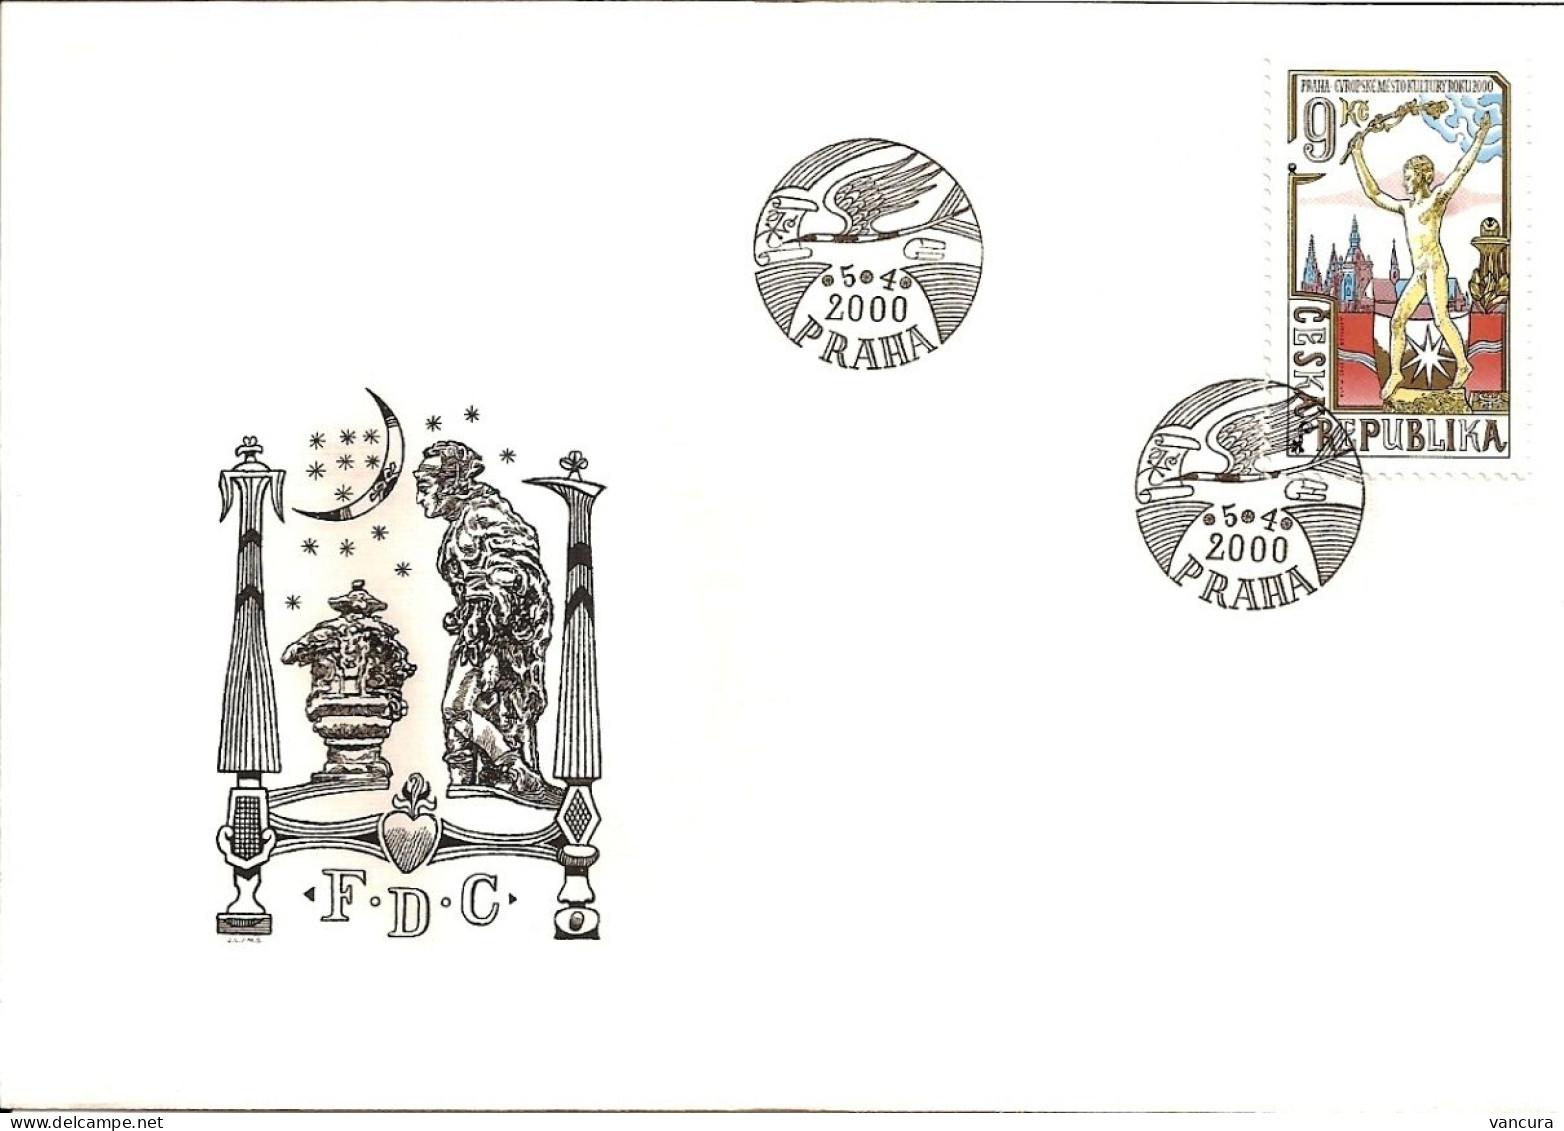 FDC 250-2 Czech Republic Prague, European City Of Culture 2000 NOTICE POOR SCANS, BUT THE FDC'S ARE PERFECT. - Escultura